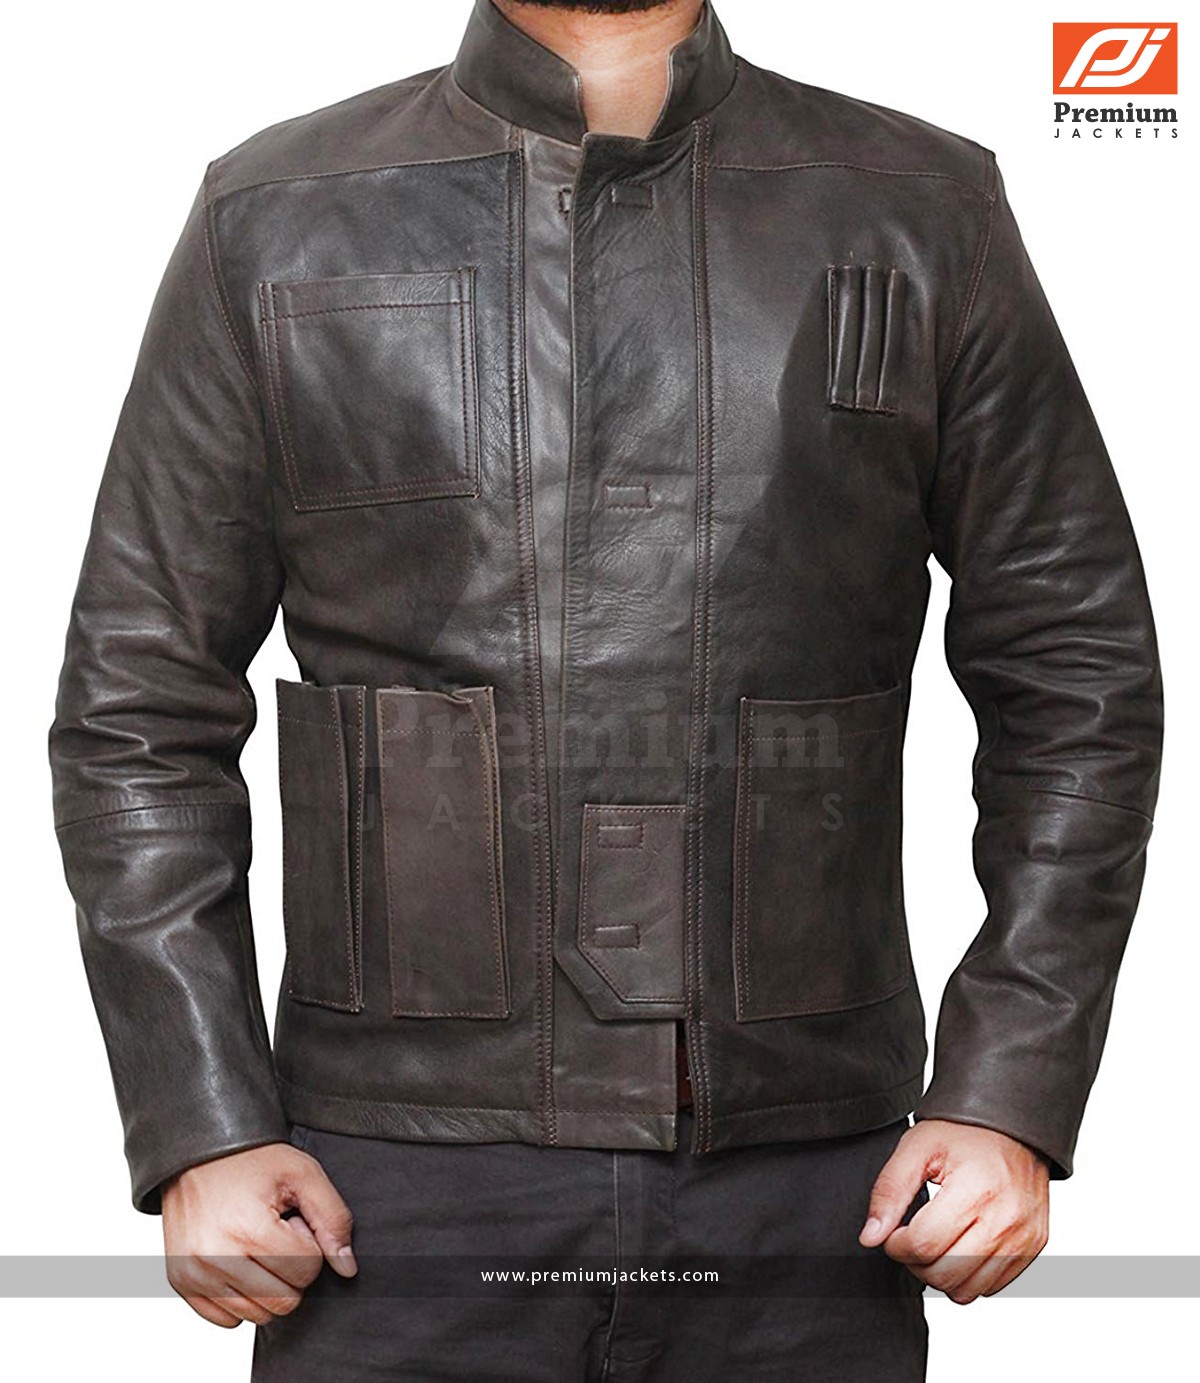 Han Solo Leather Jacket the Cool Stuff of Star Wars